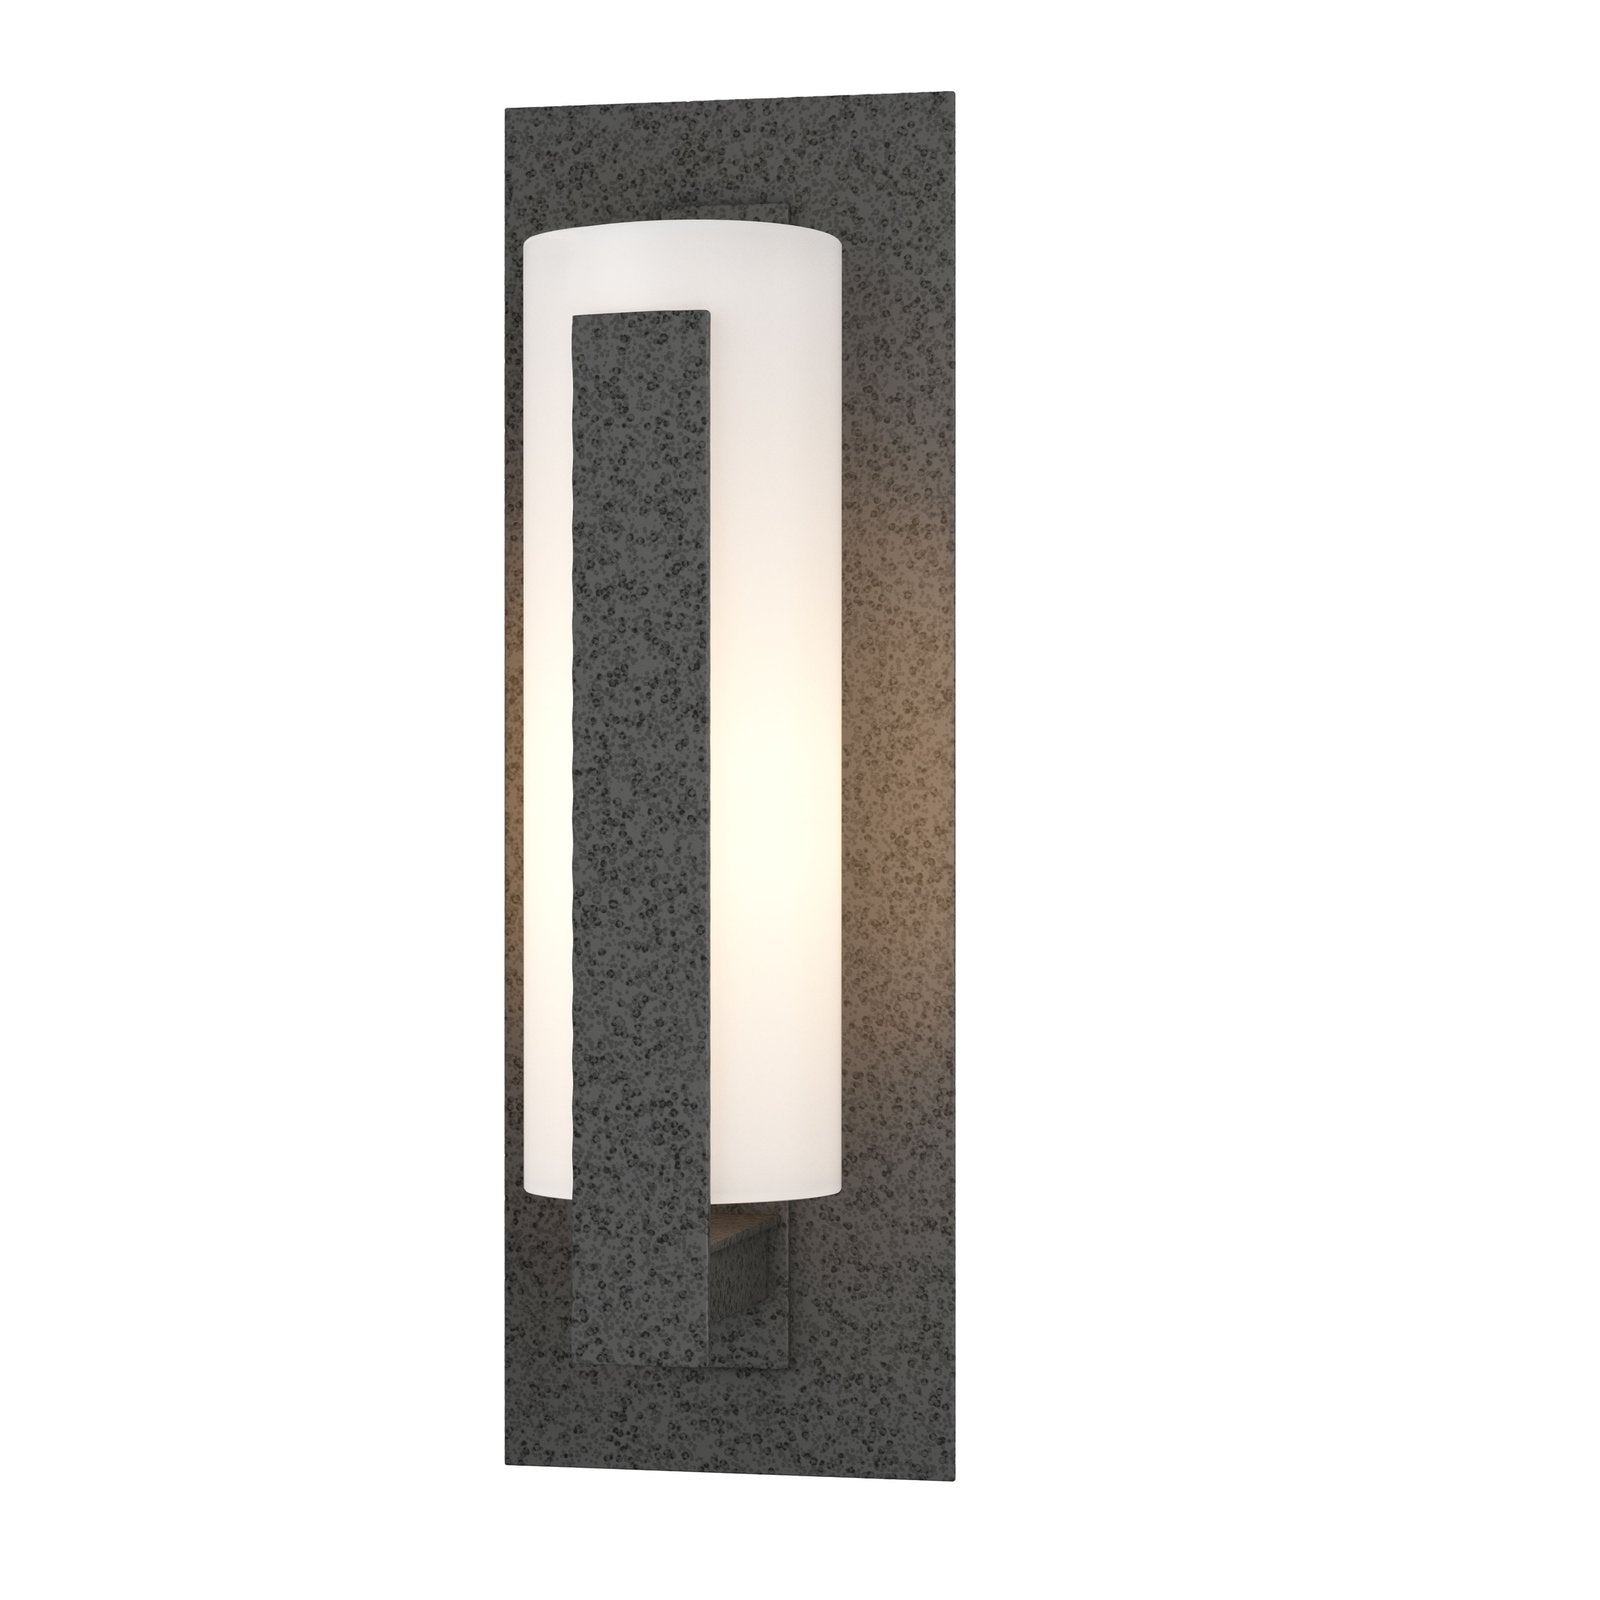 Hubbardton Forge Forged Vertical Bars Small Outdoor Sconce Outdoor l Wall Hubbardton Forge Coastal Natural Iron Opal Glass (GG) 